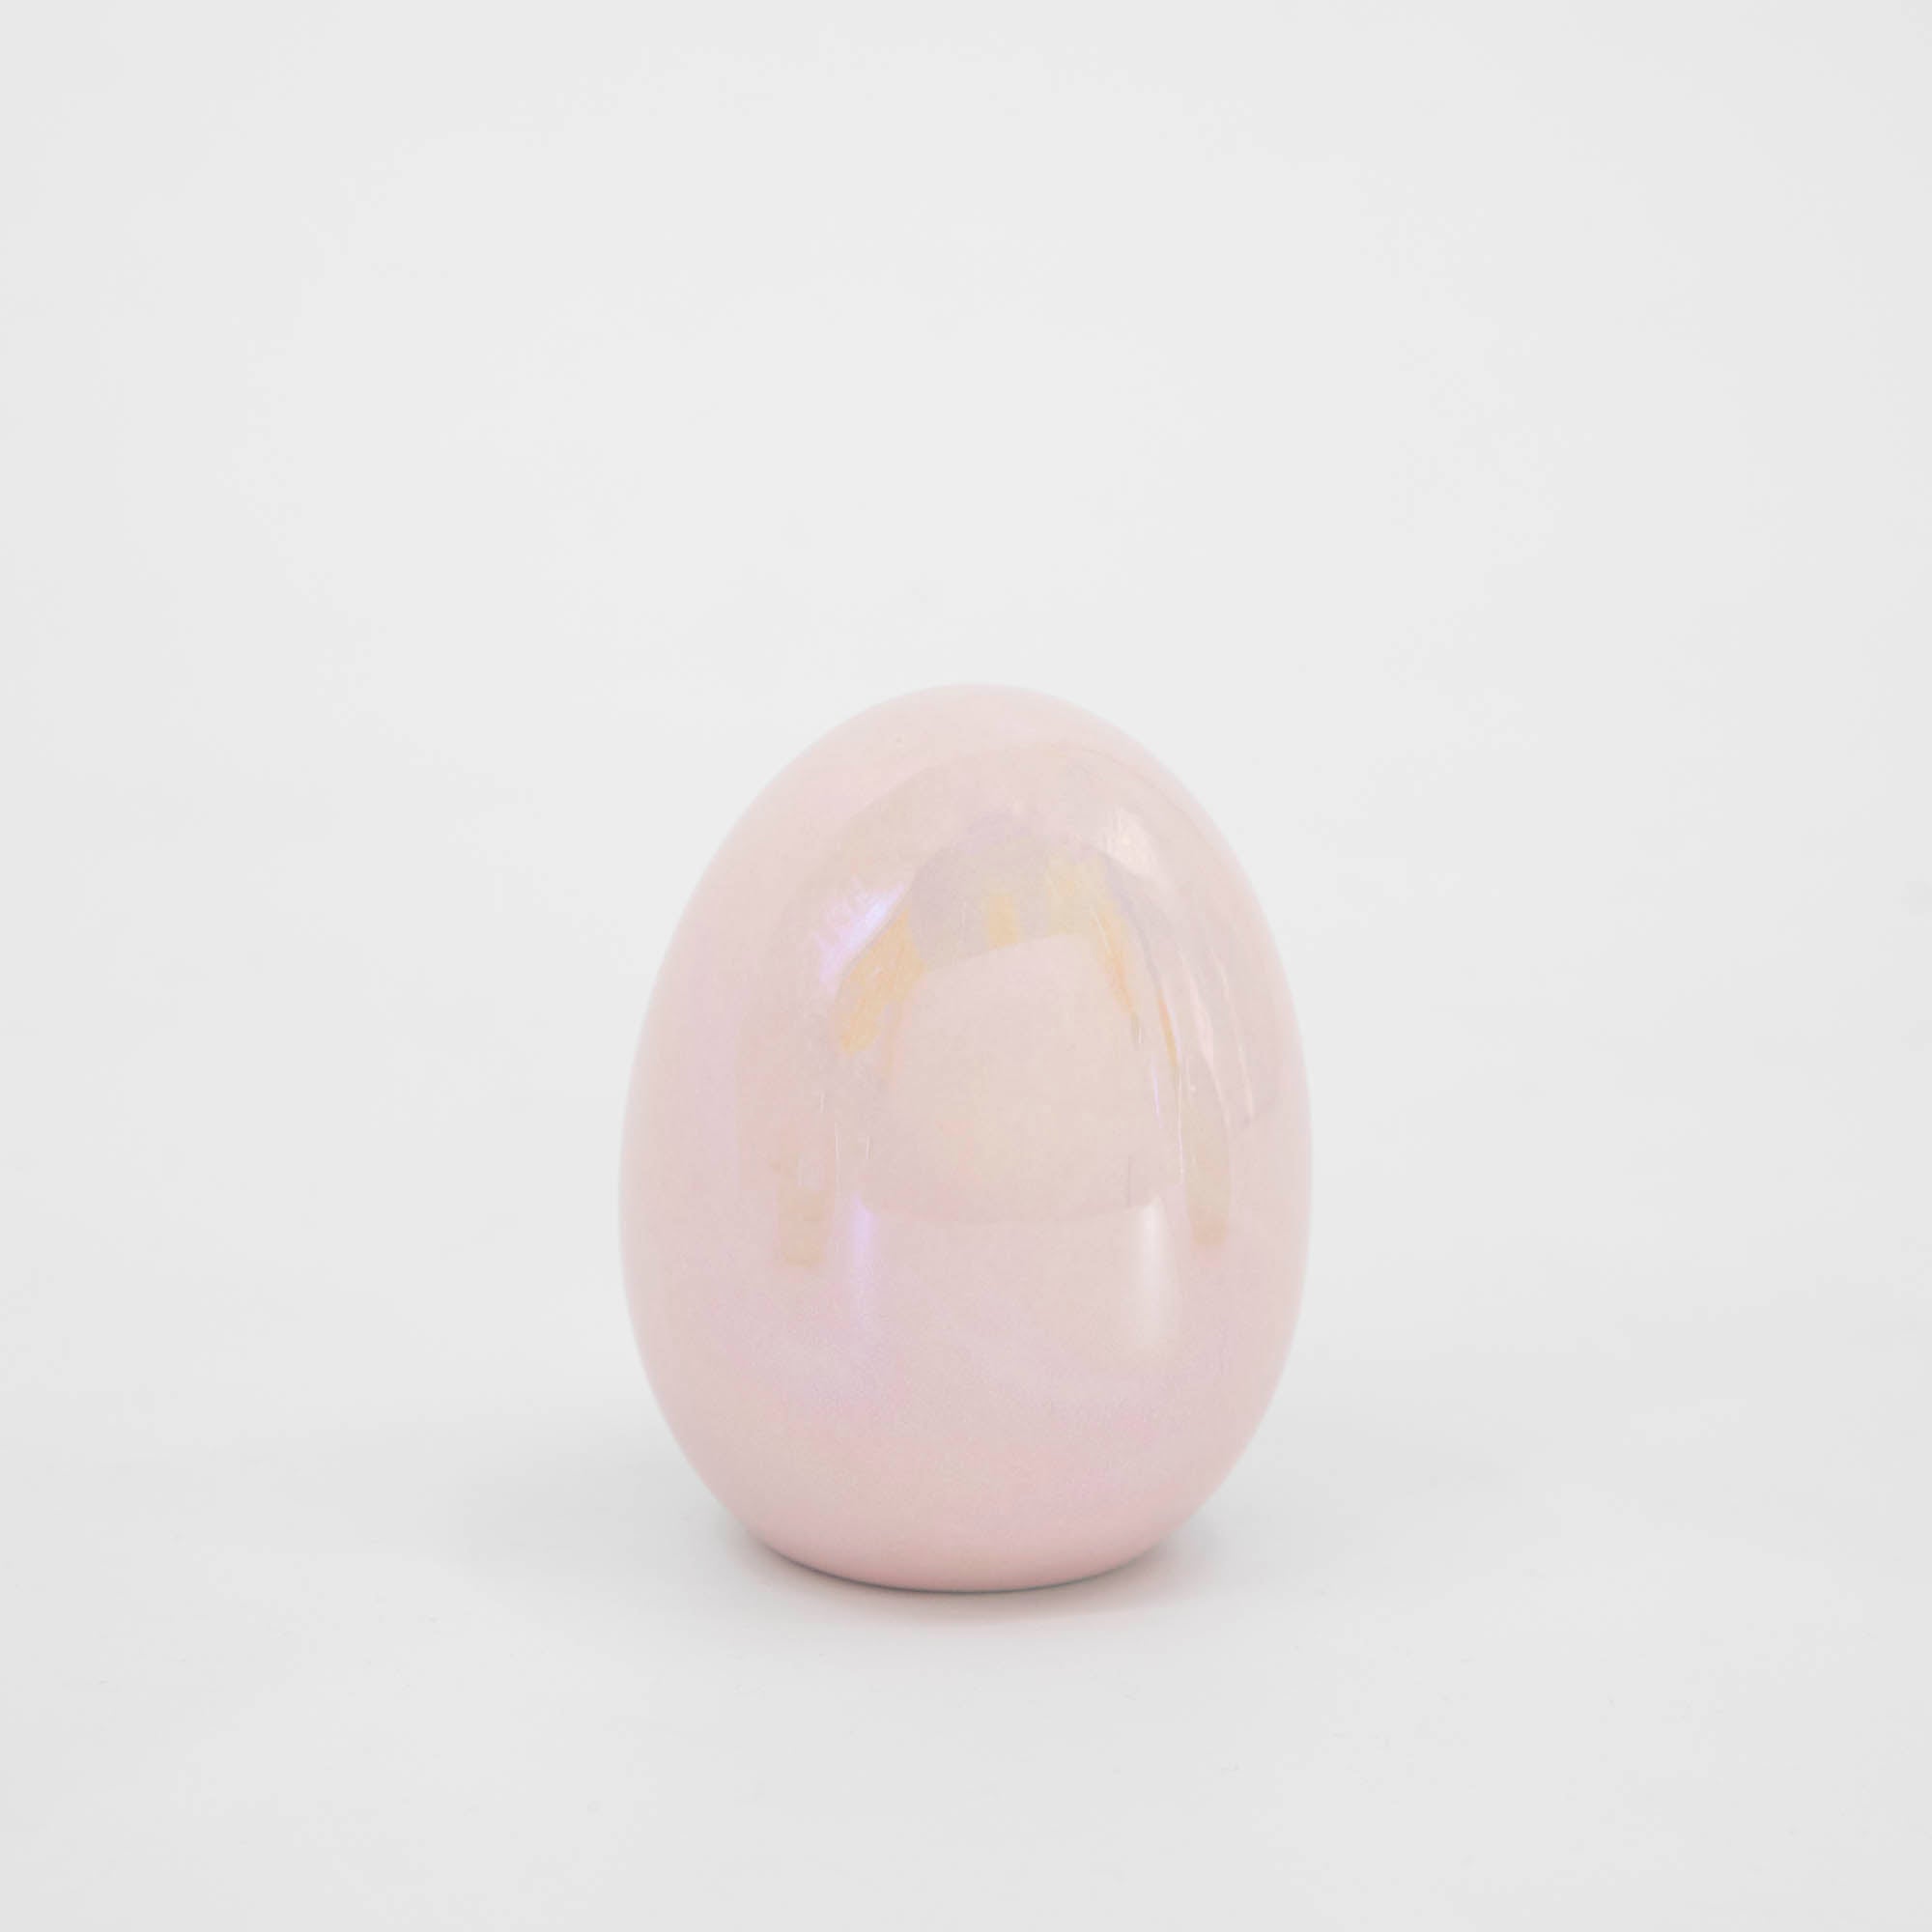 A Small Iridescent Easter egg sitting on a white surface. (Brand Name: Glitterville)